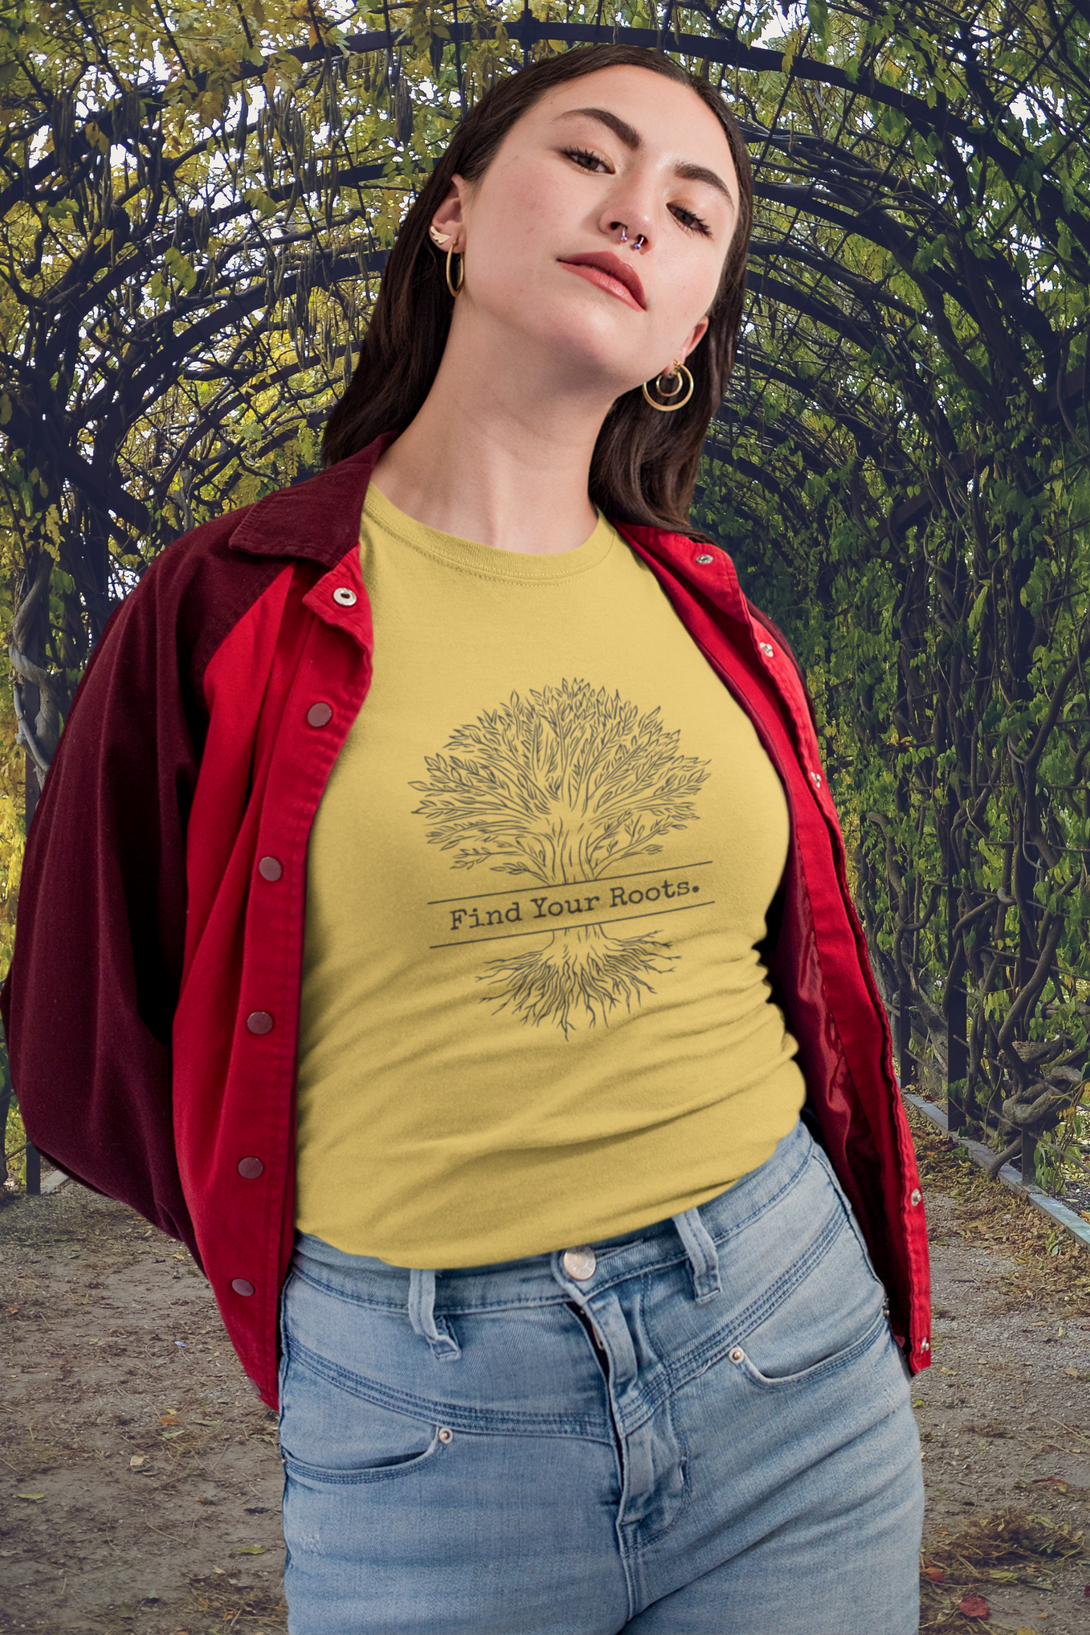 Find Your Roots Printed T-Shirt For Women - WowWaves - 3